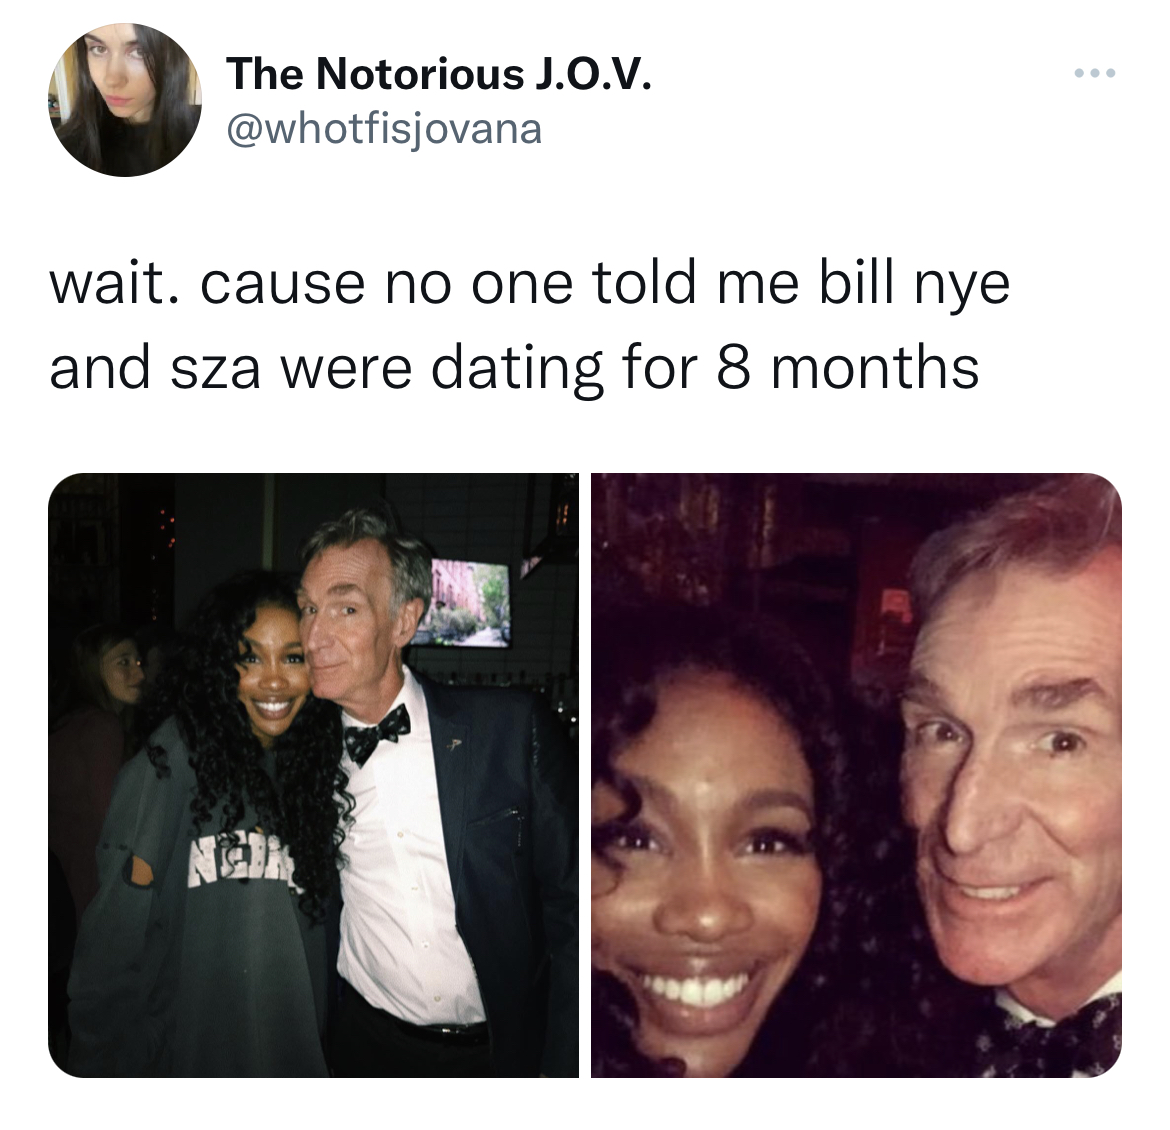 photo caption - The Notorious J.O.V. wait. cause no one told me bill nye and sza were dating for 8 months